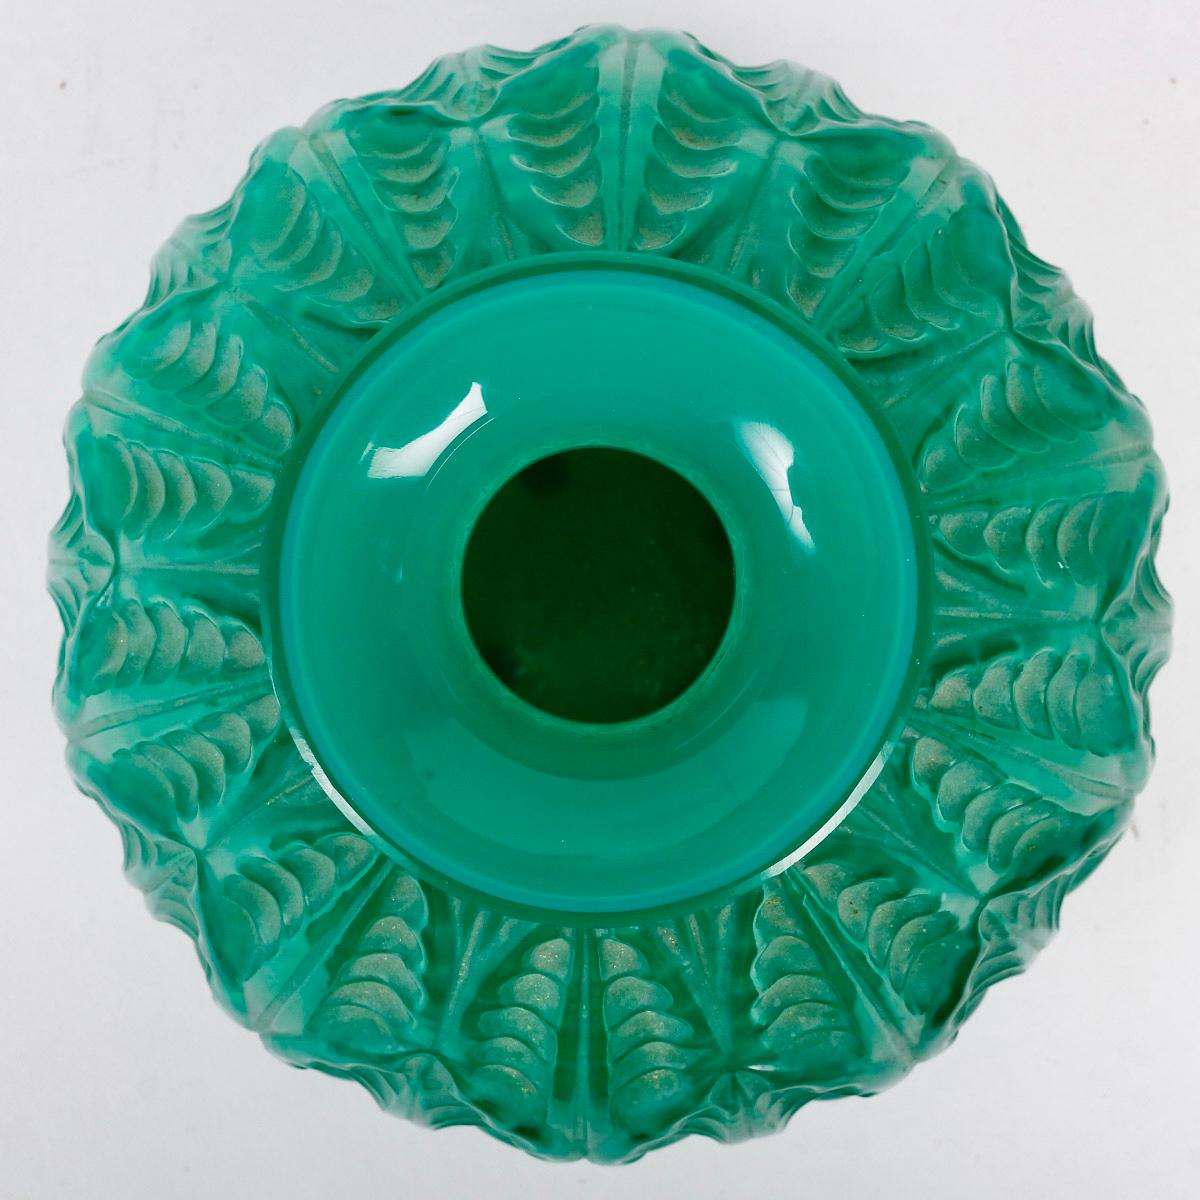 Molded 1927 René Lalique Vase Malesherbes Jade Peppermint Green Glass White Patina